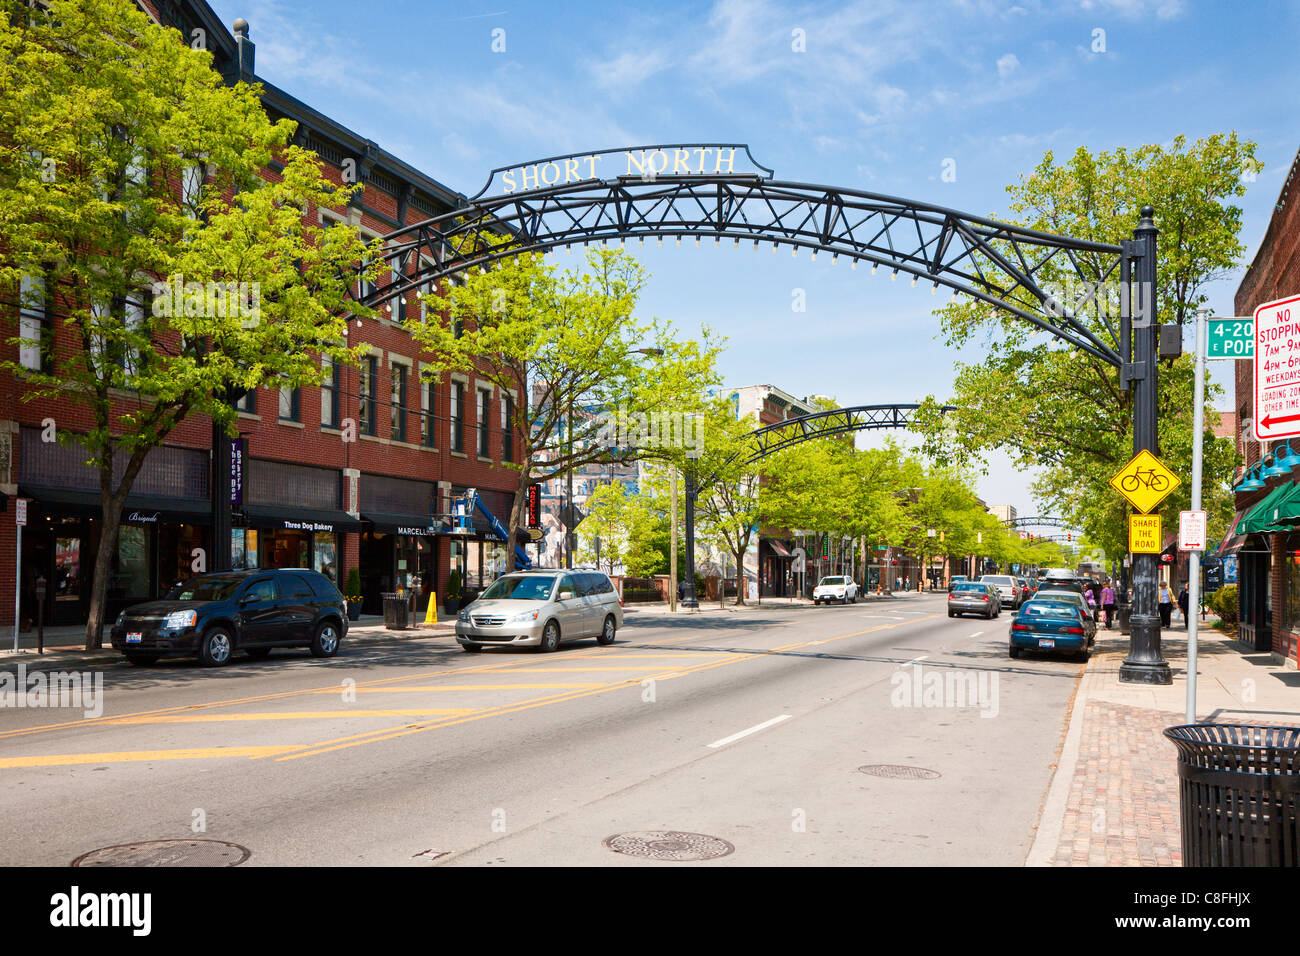 metal-arches-over-high-street-in-the-sho